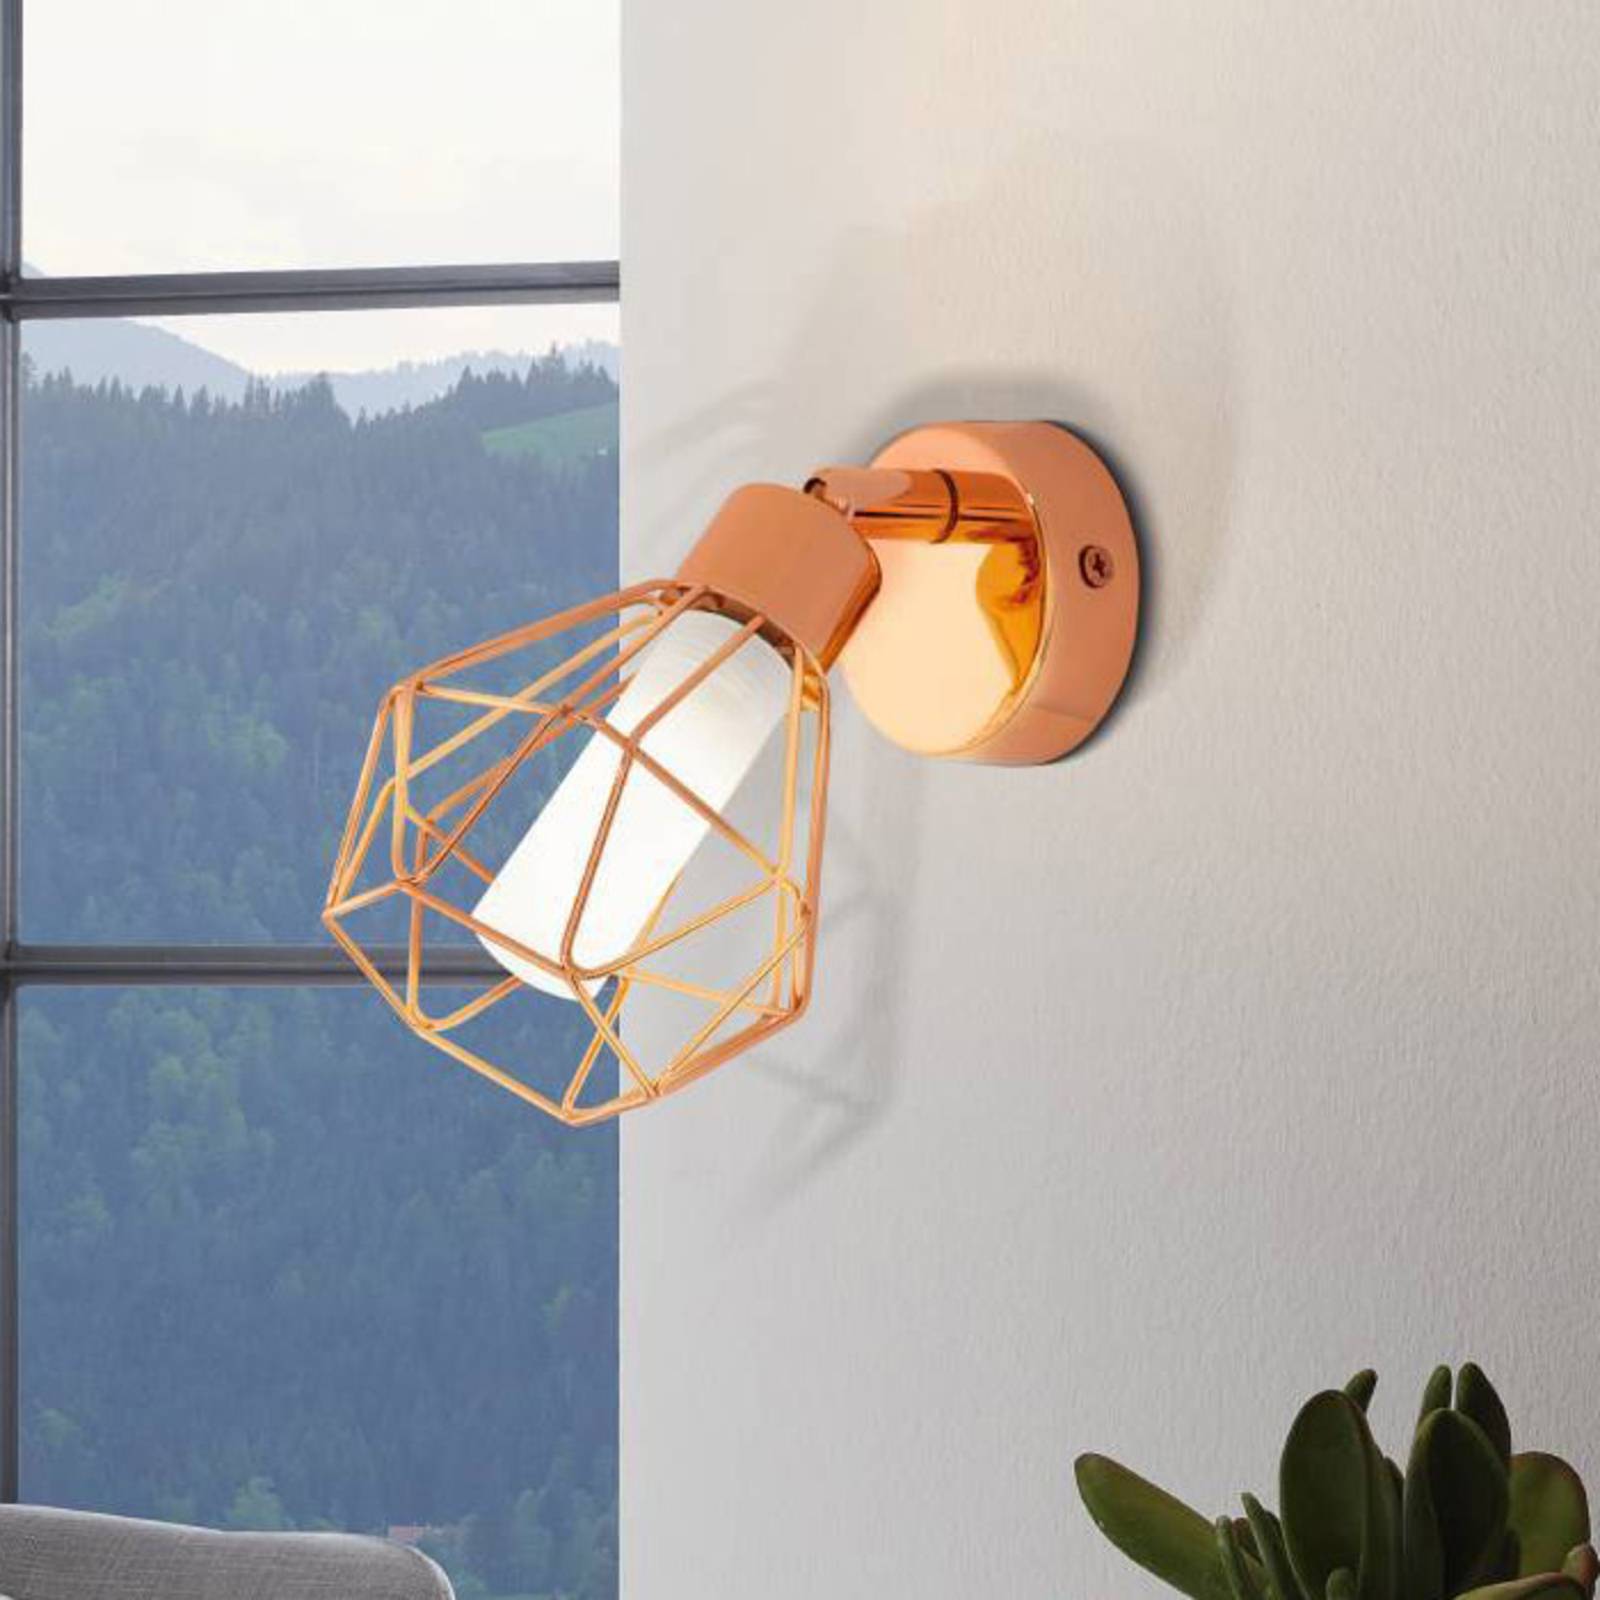 Photos - Chandelier / Lamp EGLO Copper-coloured Zapata LED wall light, cage look 